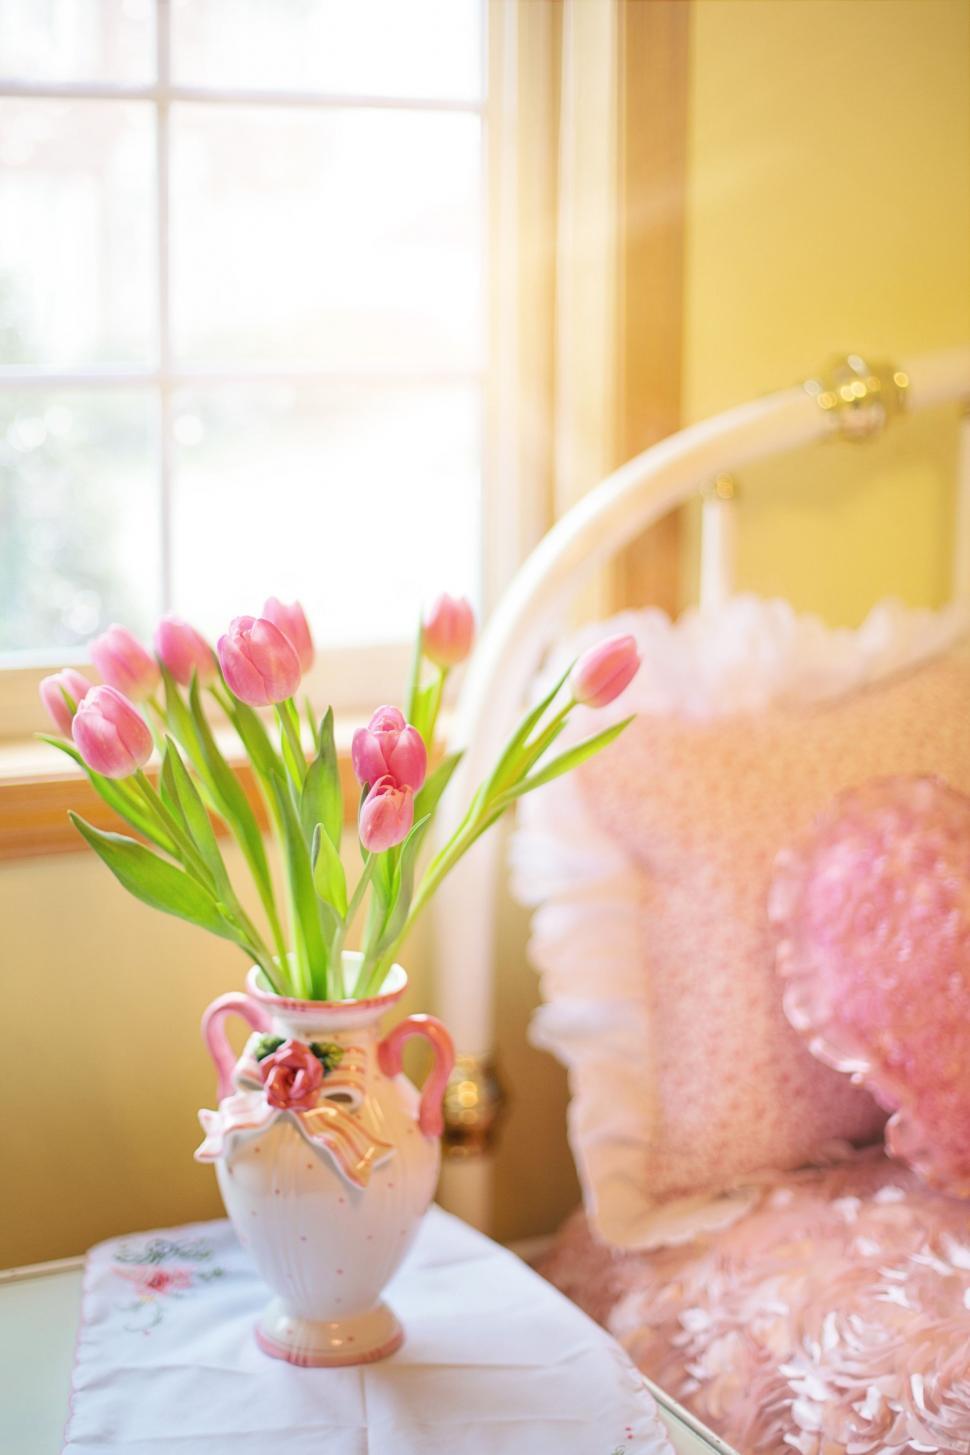 Free Image of Pink Flowers in Vase with Bed  